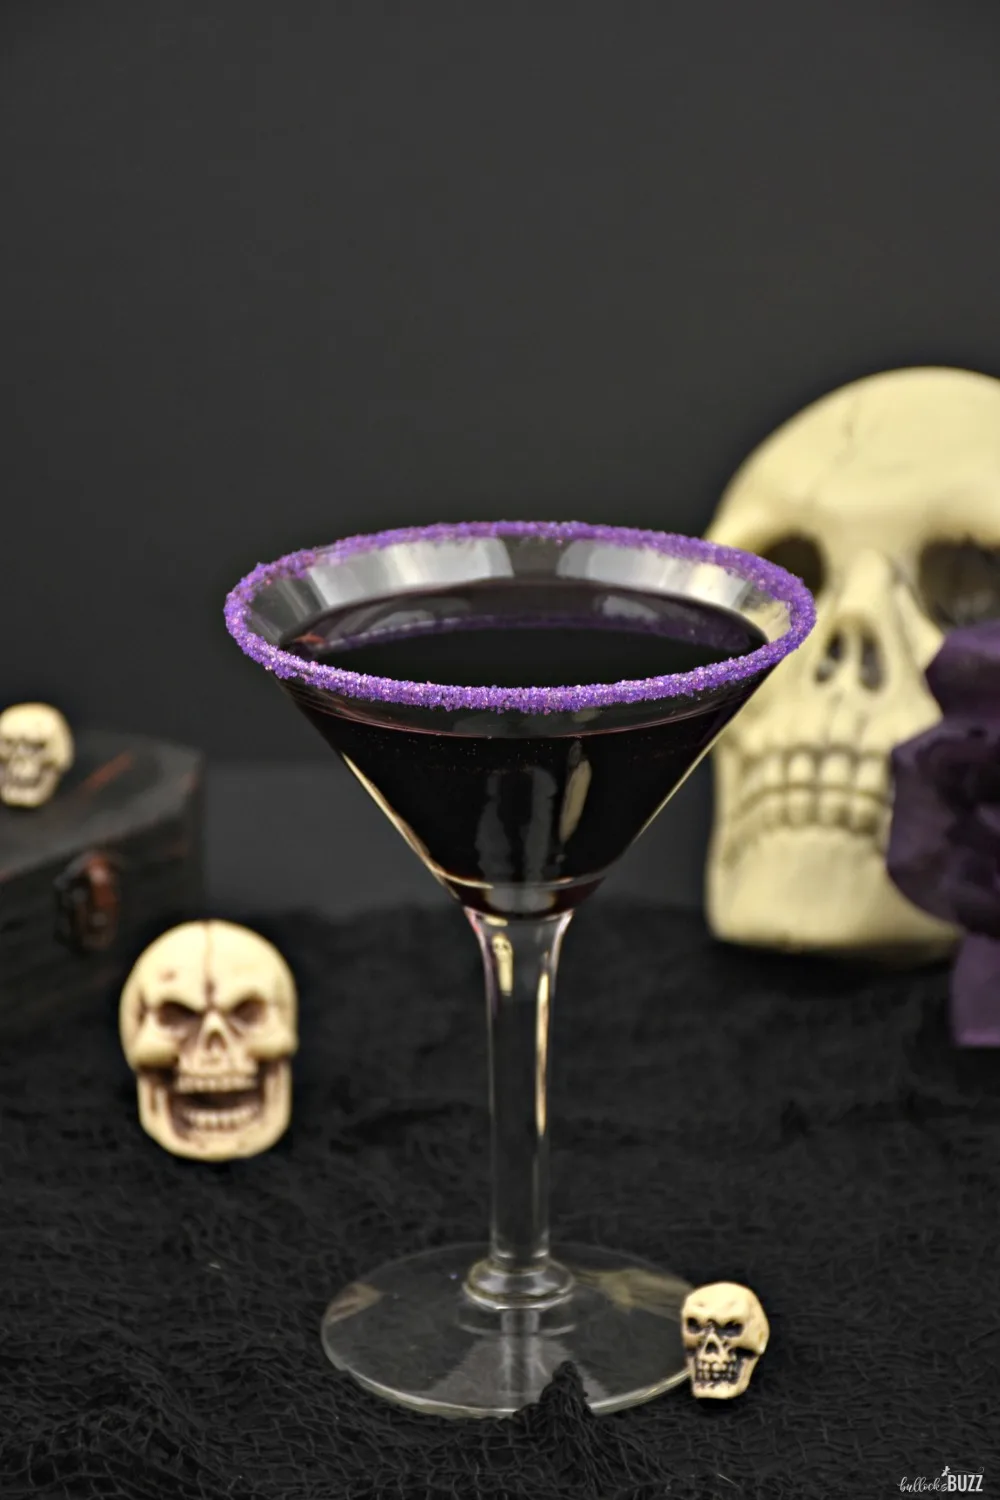 With its deadly delicious taste of cranberries and rum, and its deep purple color, this Gravedigger Halloween cocktail is to die for! Get the recipe on the Bullock's Buzz blog!